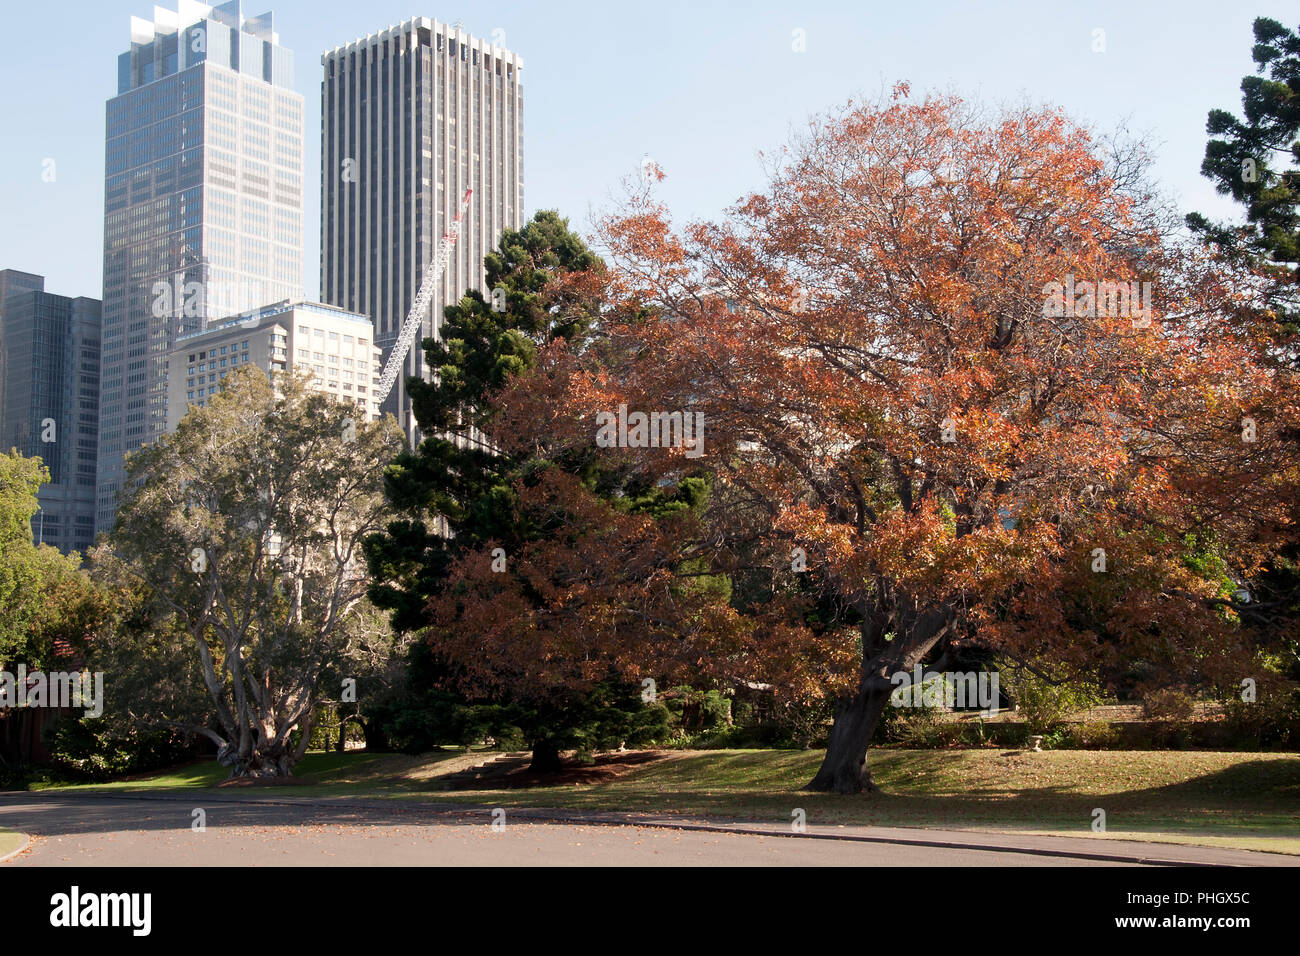 Sydney Australia, view of city buildings from  botanical gardens in autumn Stock Photo